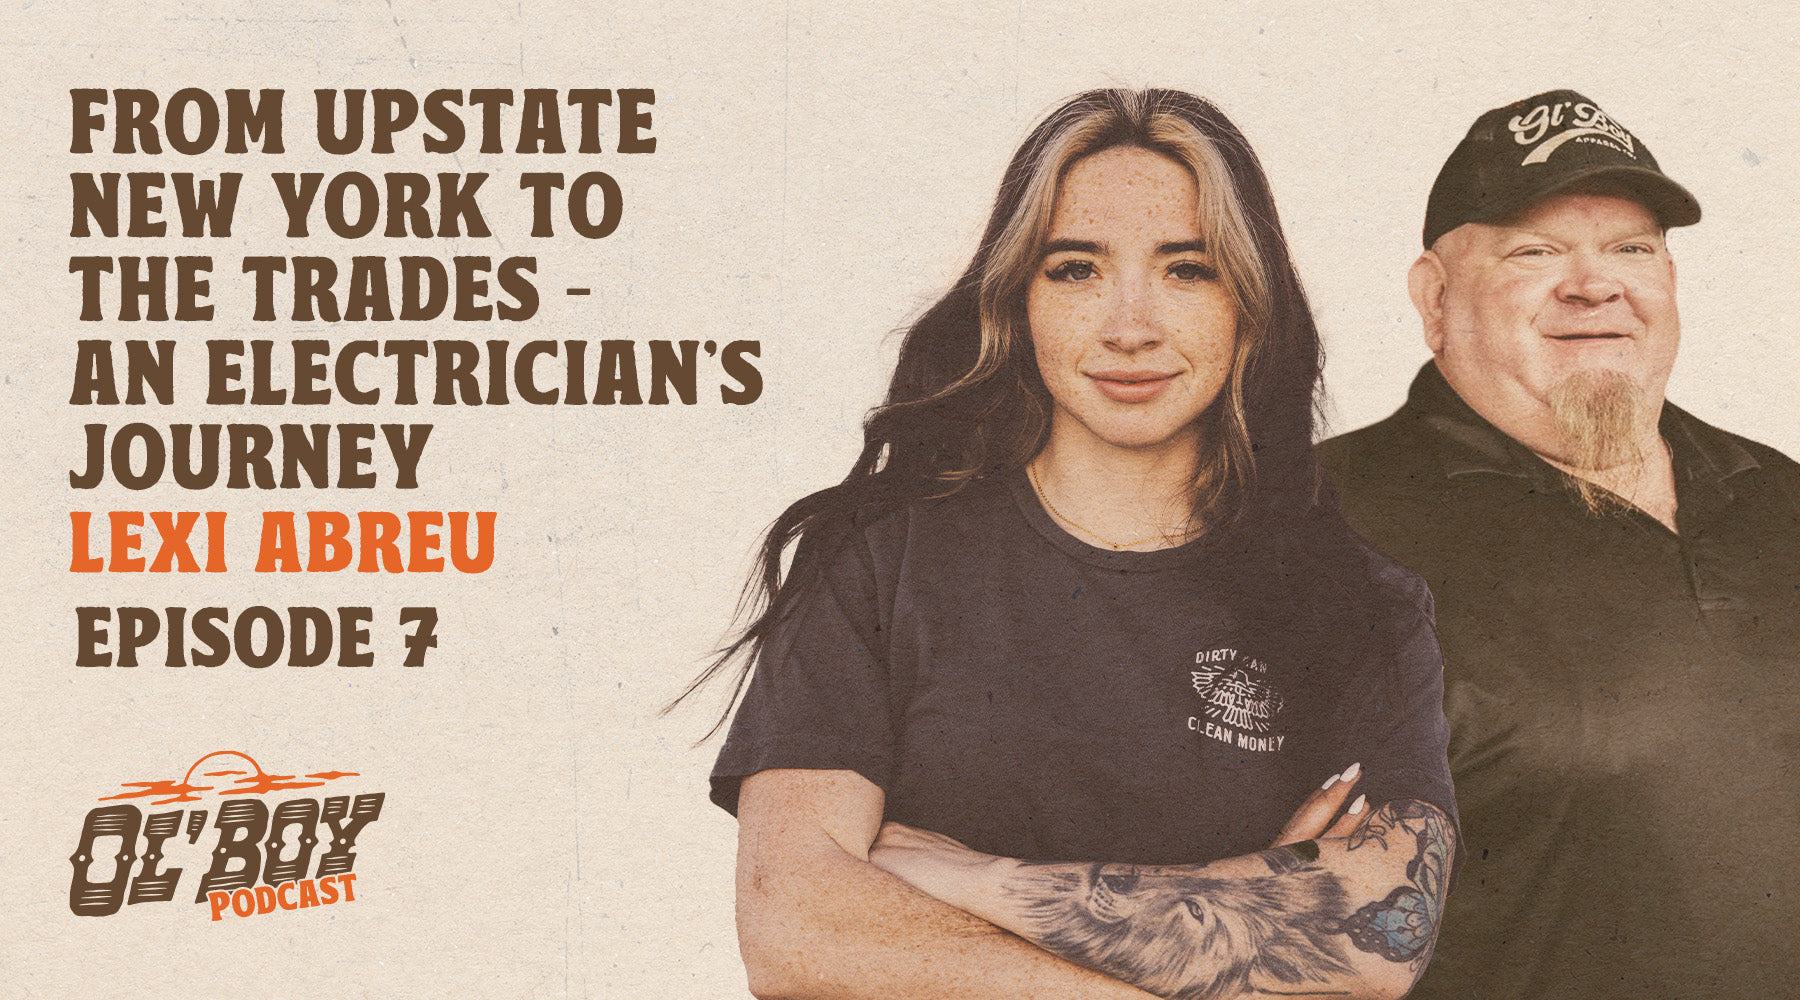 Episode 7 - Lexi Abreu: From Upstate New York to the Trades - An Electrician's Journey